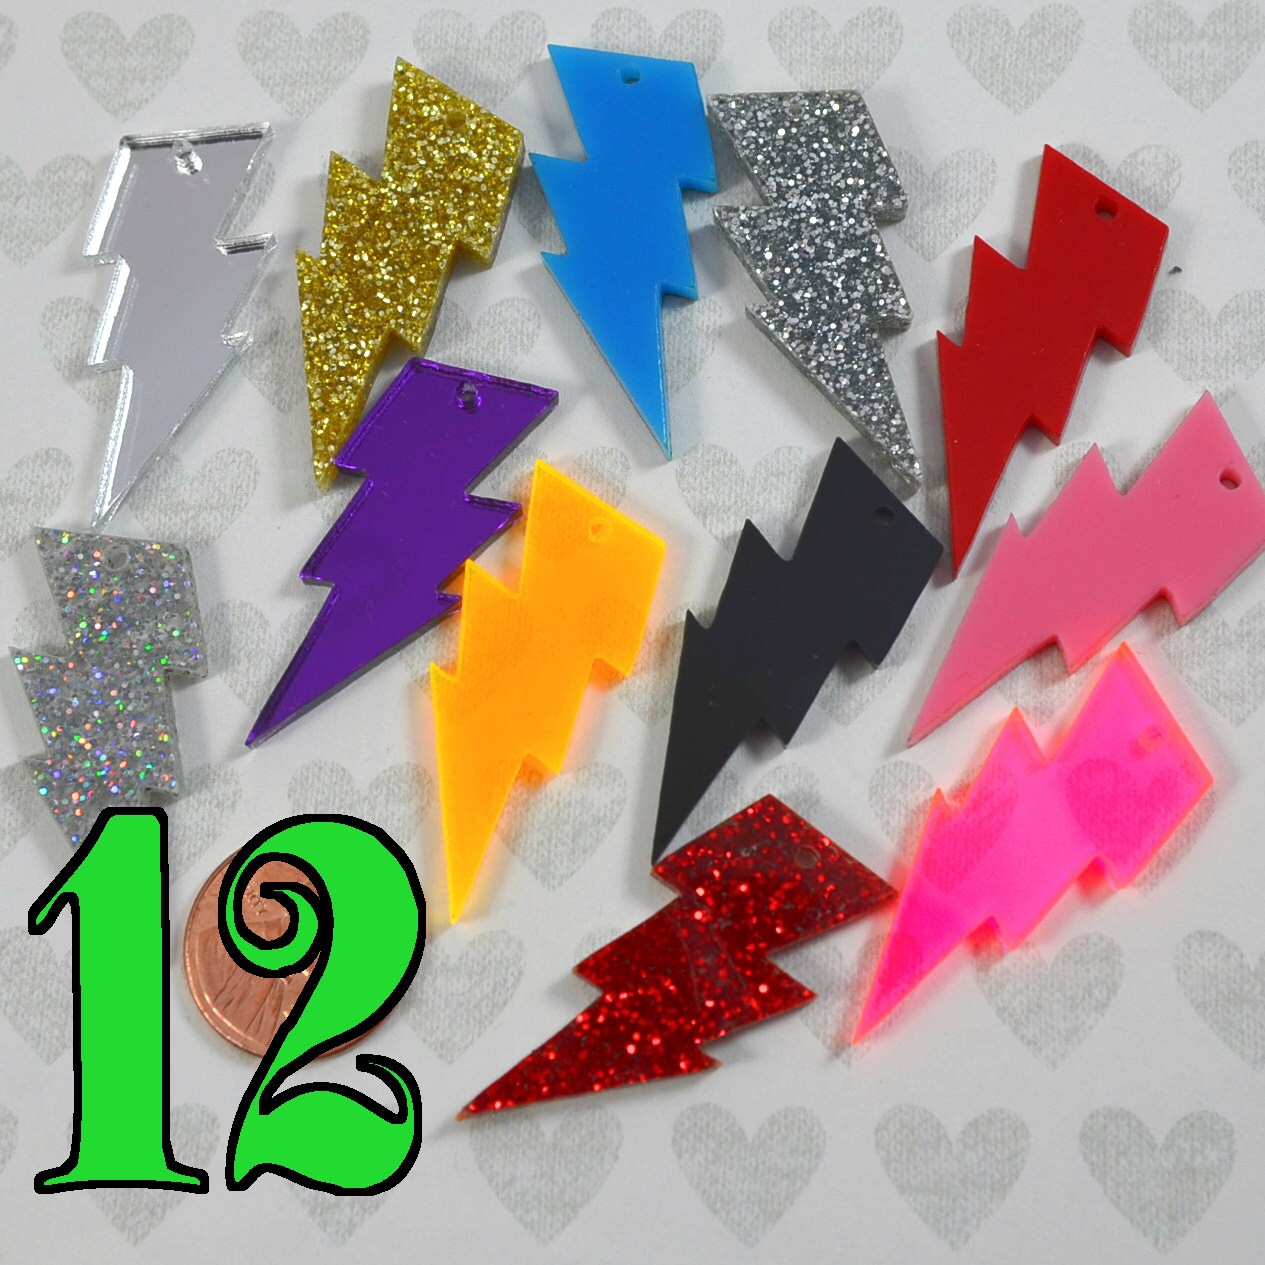 LIGHTNING BOLT LOT Set of 12 Charms or Cabs in Laser Cut Acrylic